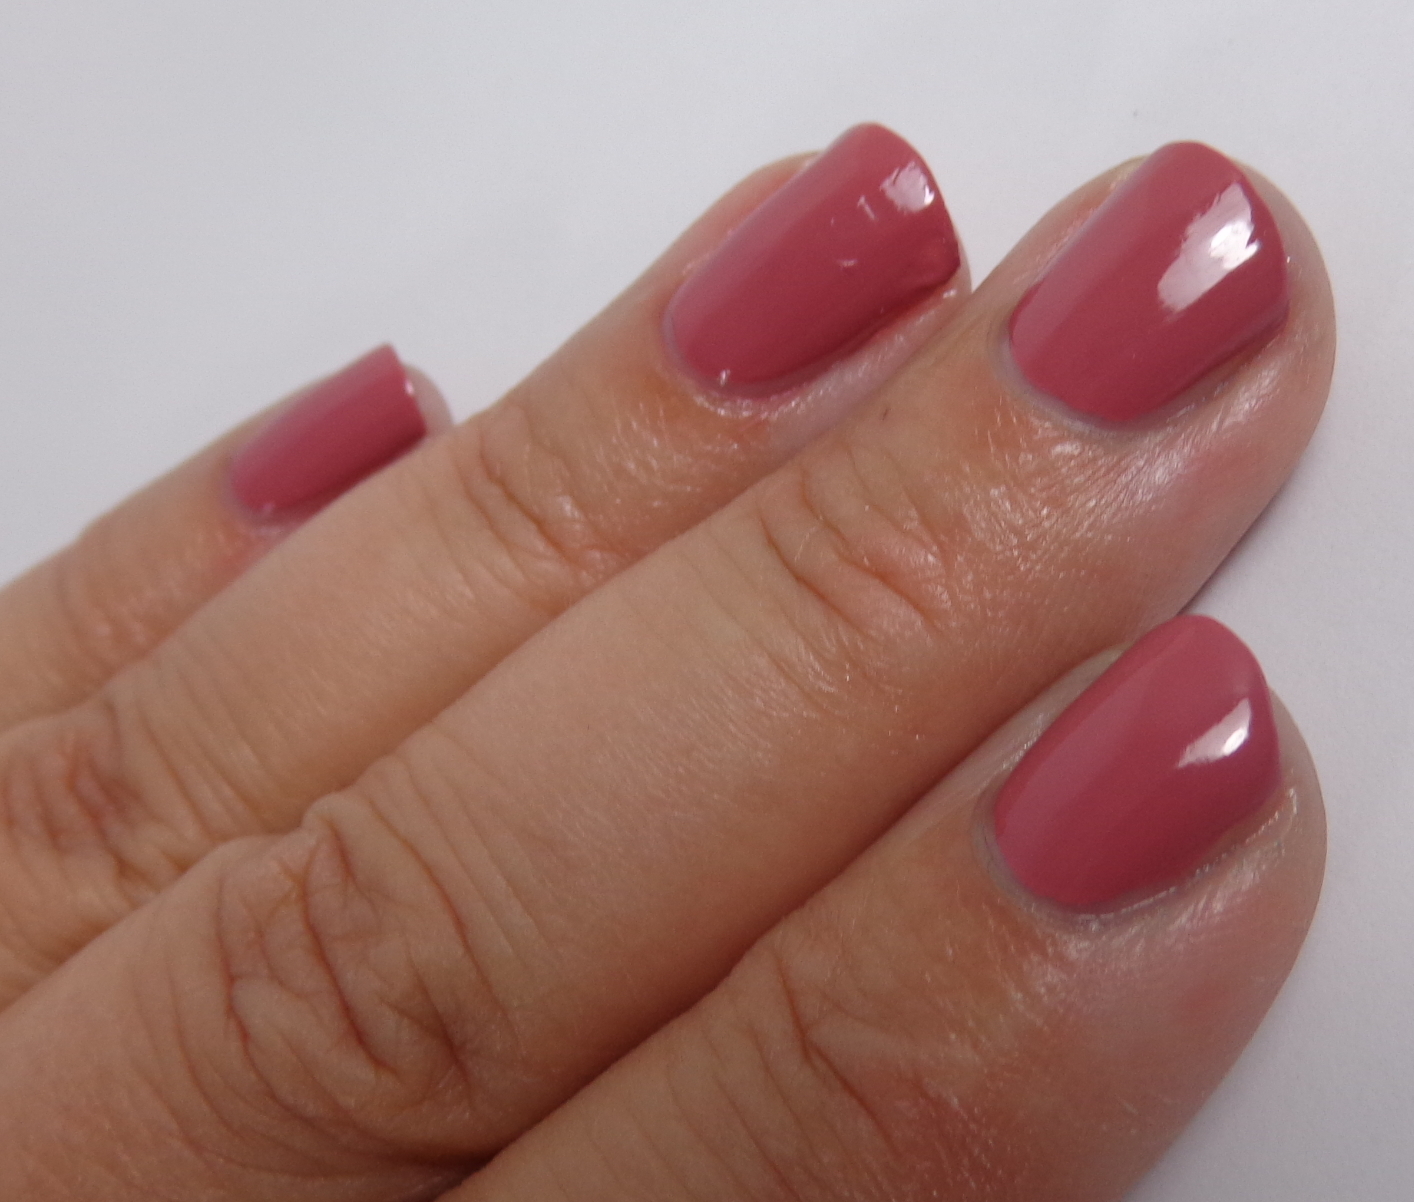 Swatch & Review: Shades from Wet n Megalast Salon Nail Color - My Highest